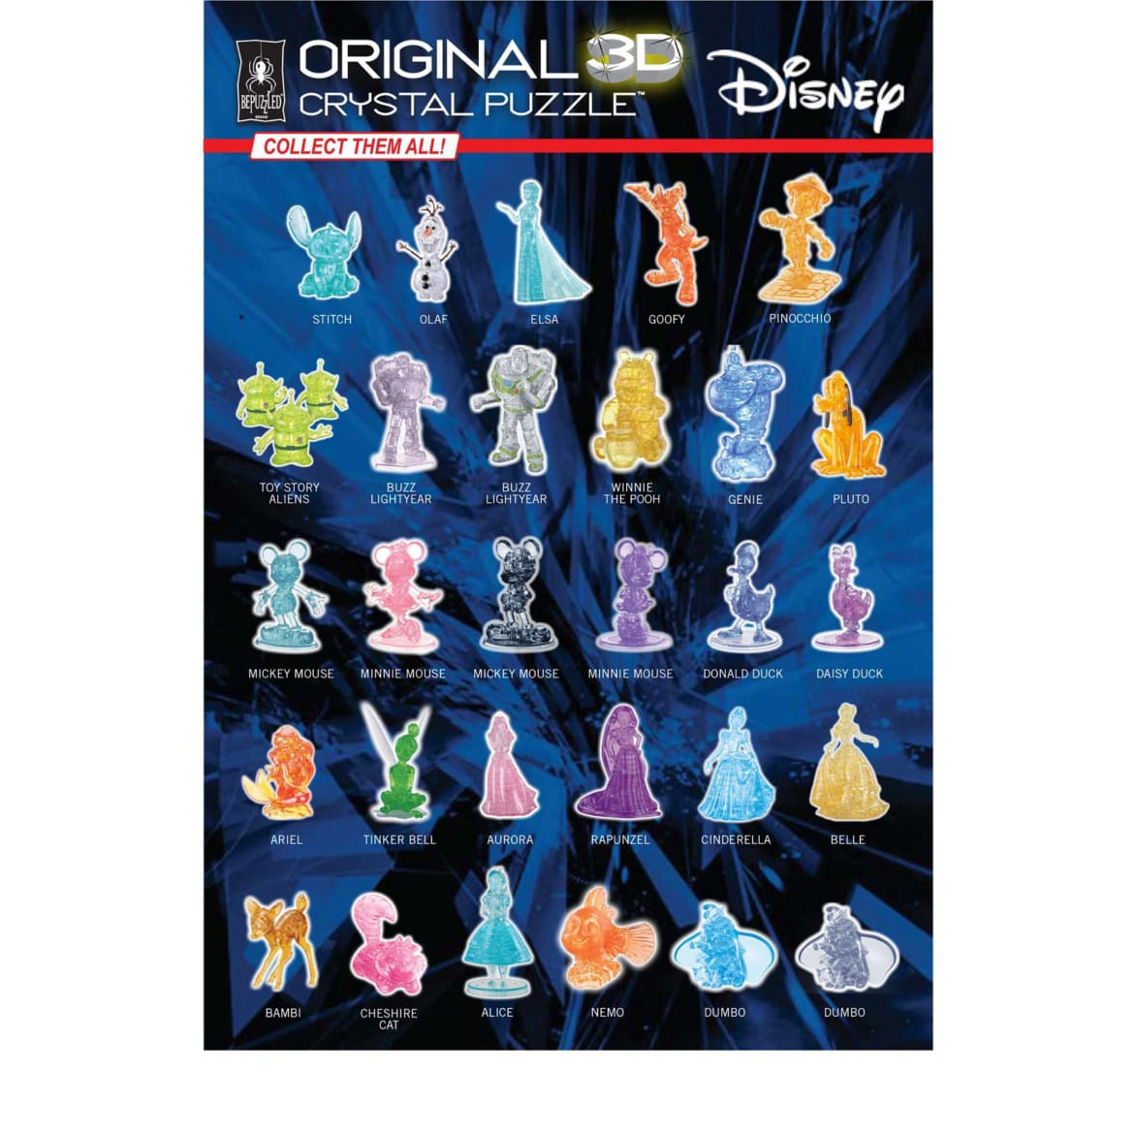 BePuzzled 3D Crystal Puzzle - Disney Mickey Mouse (Multi-Color): 36 Pcs - Image 3 of 5